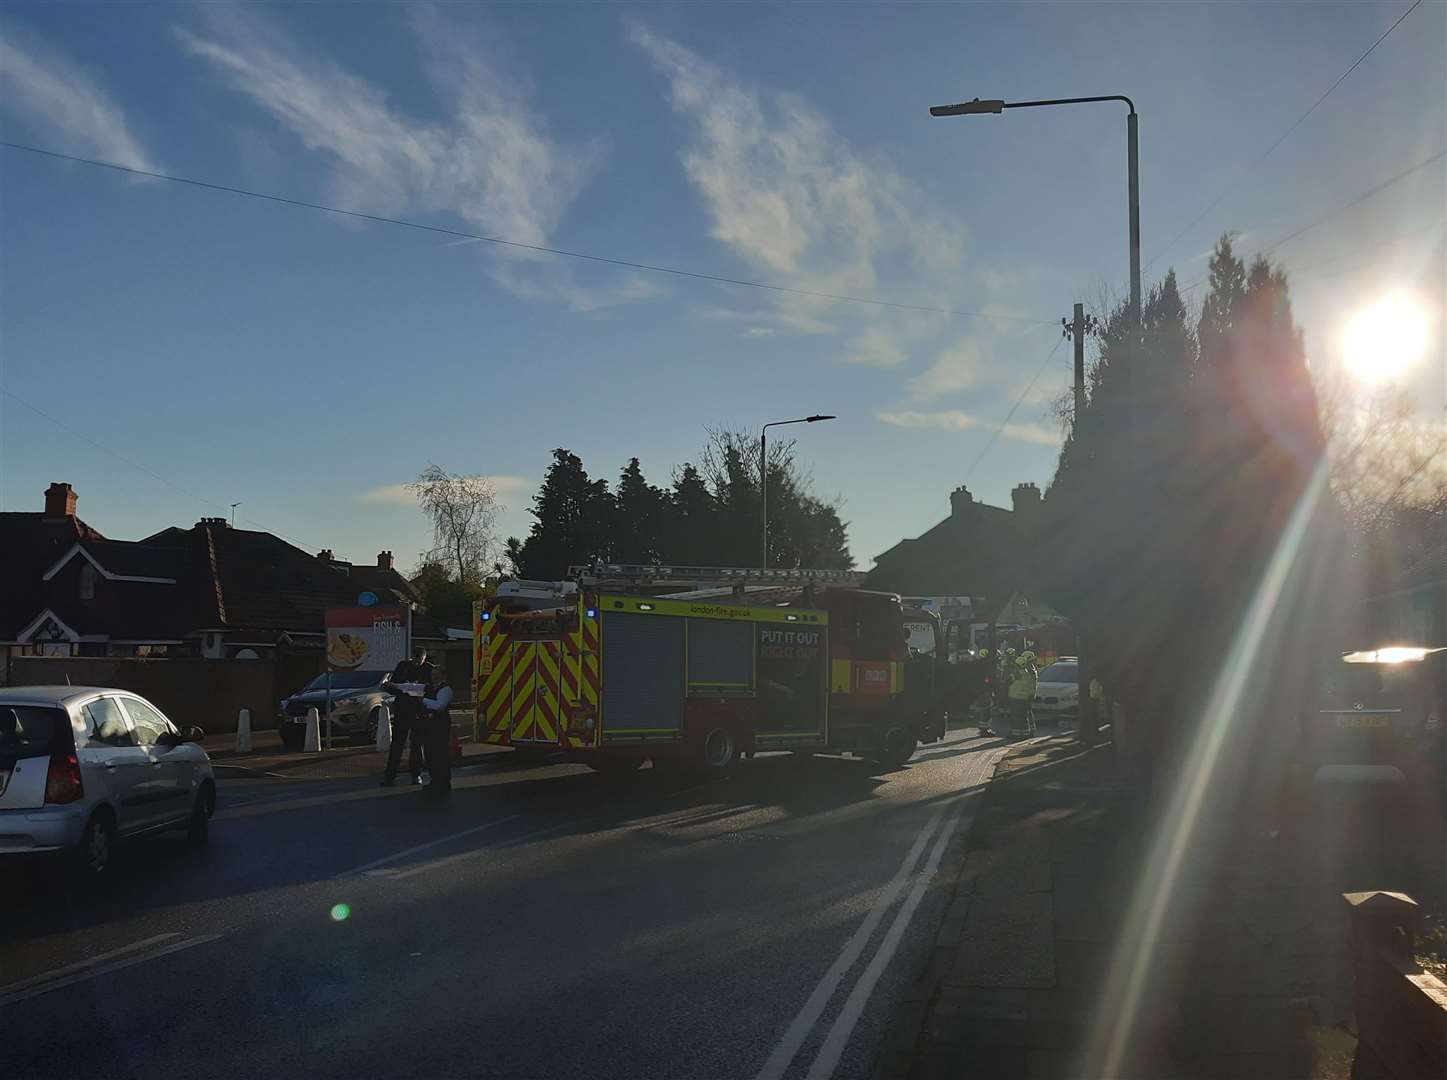 Fire engines have blocked off parts of Long Lane in Bexleyheath this morning while they respond to an incident